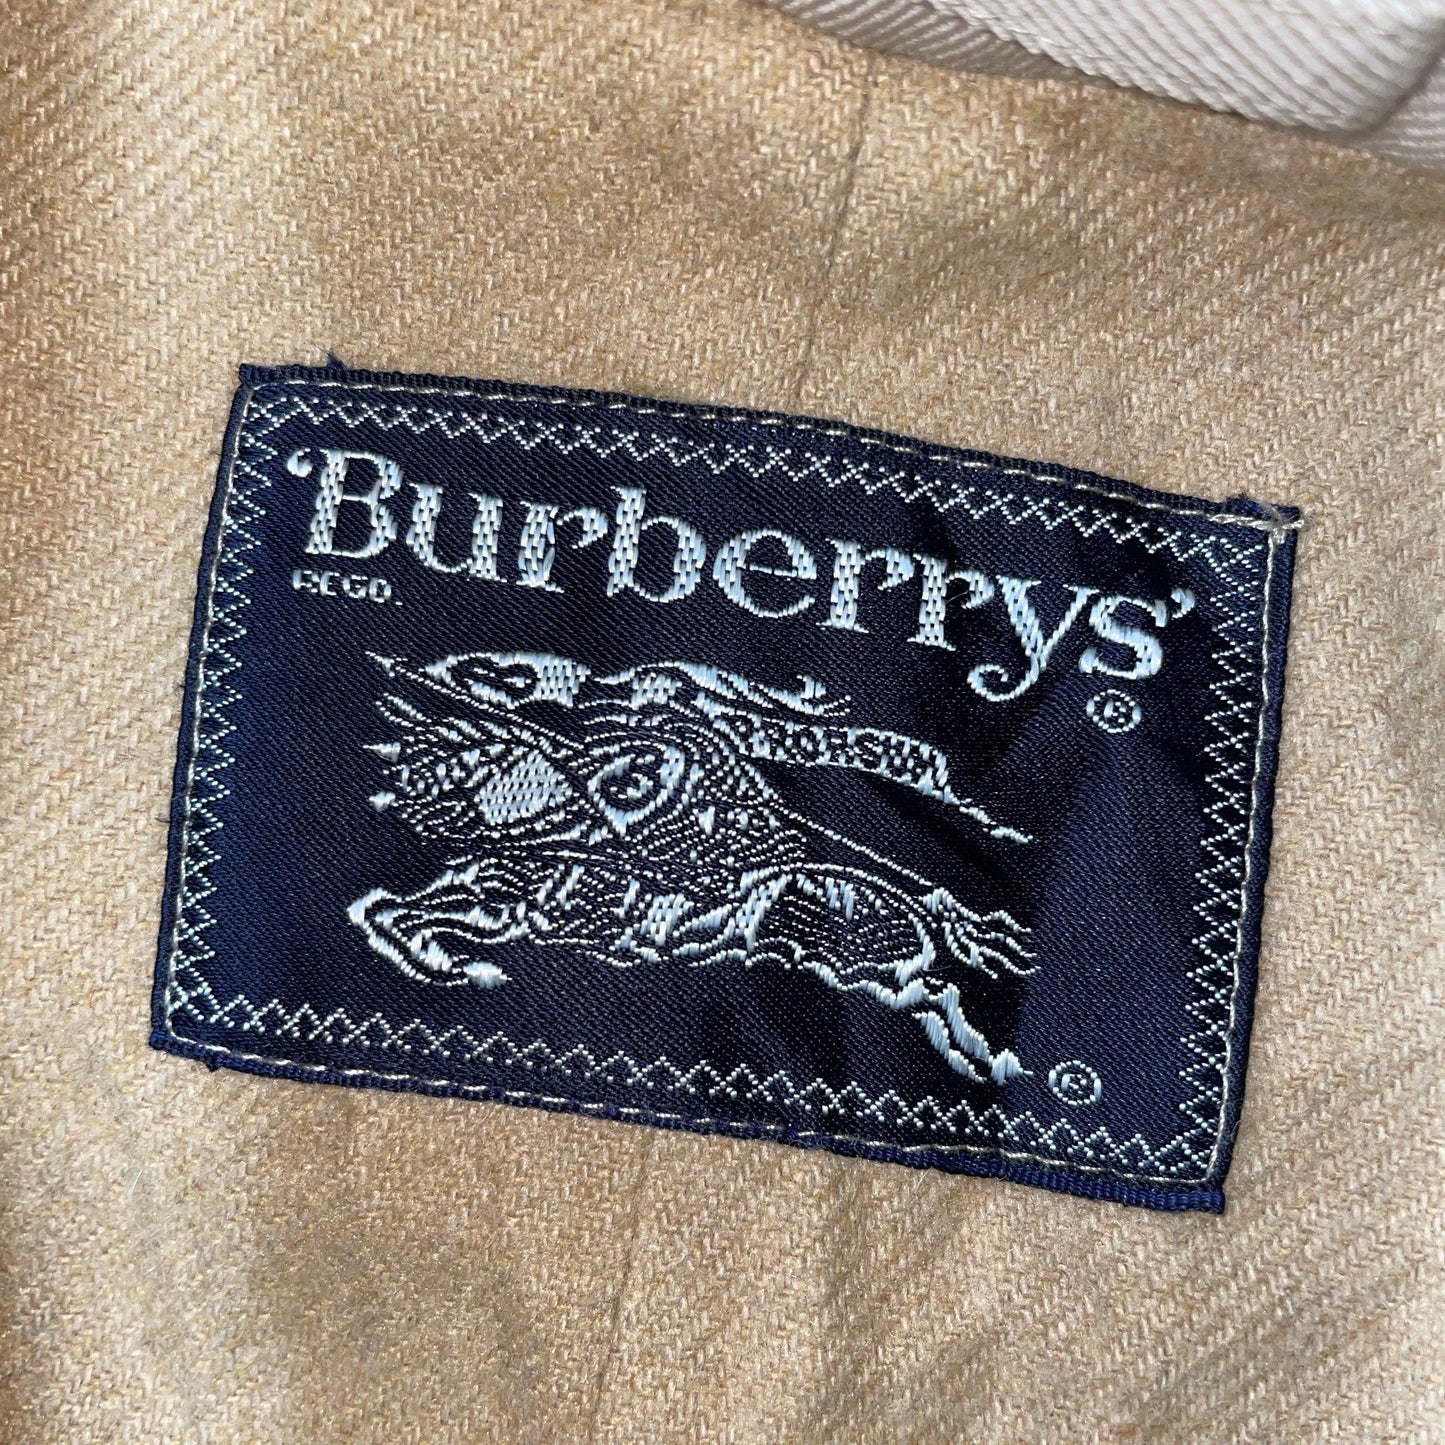 burberrys wool coat made in france